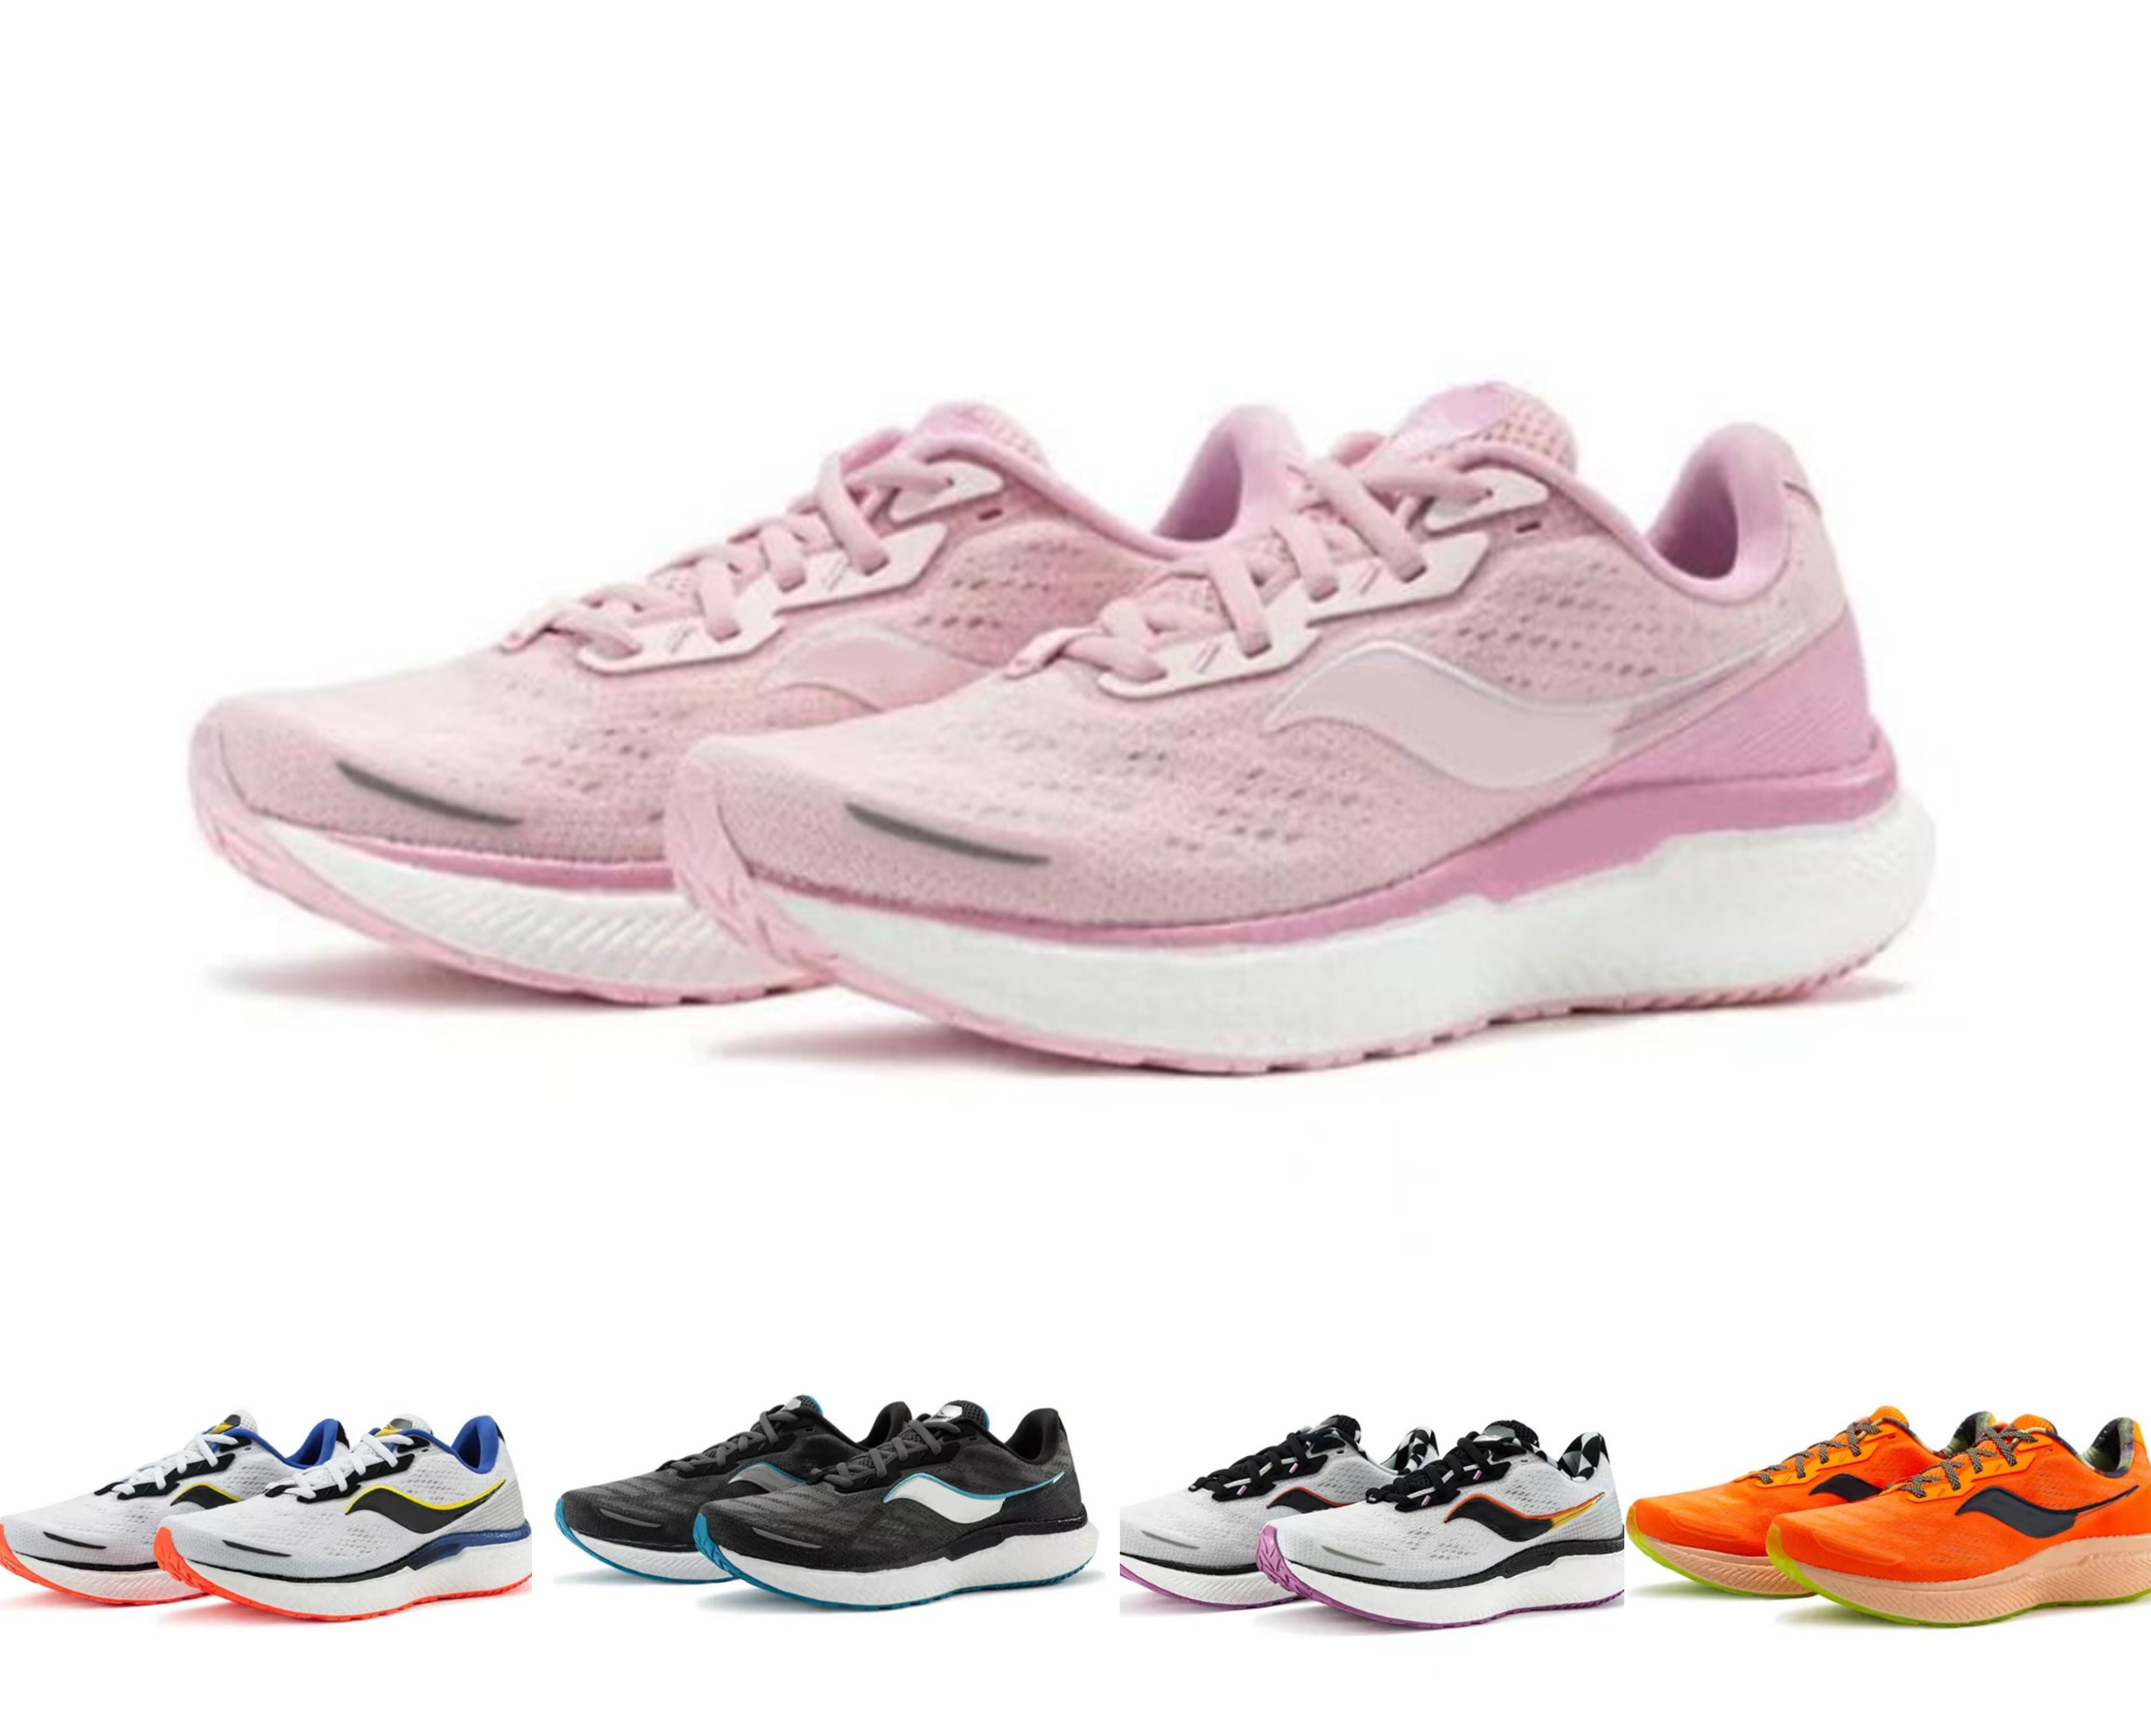 

trainers Triumph 19 Running Shoes Moderately Cushioned Daily Trainer 2022 men women yakuda local online store training Sneakers sports boots sportswear run, Pink 36-41